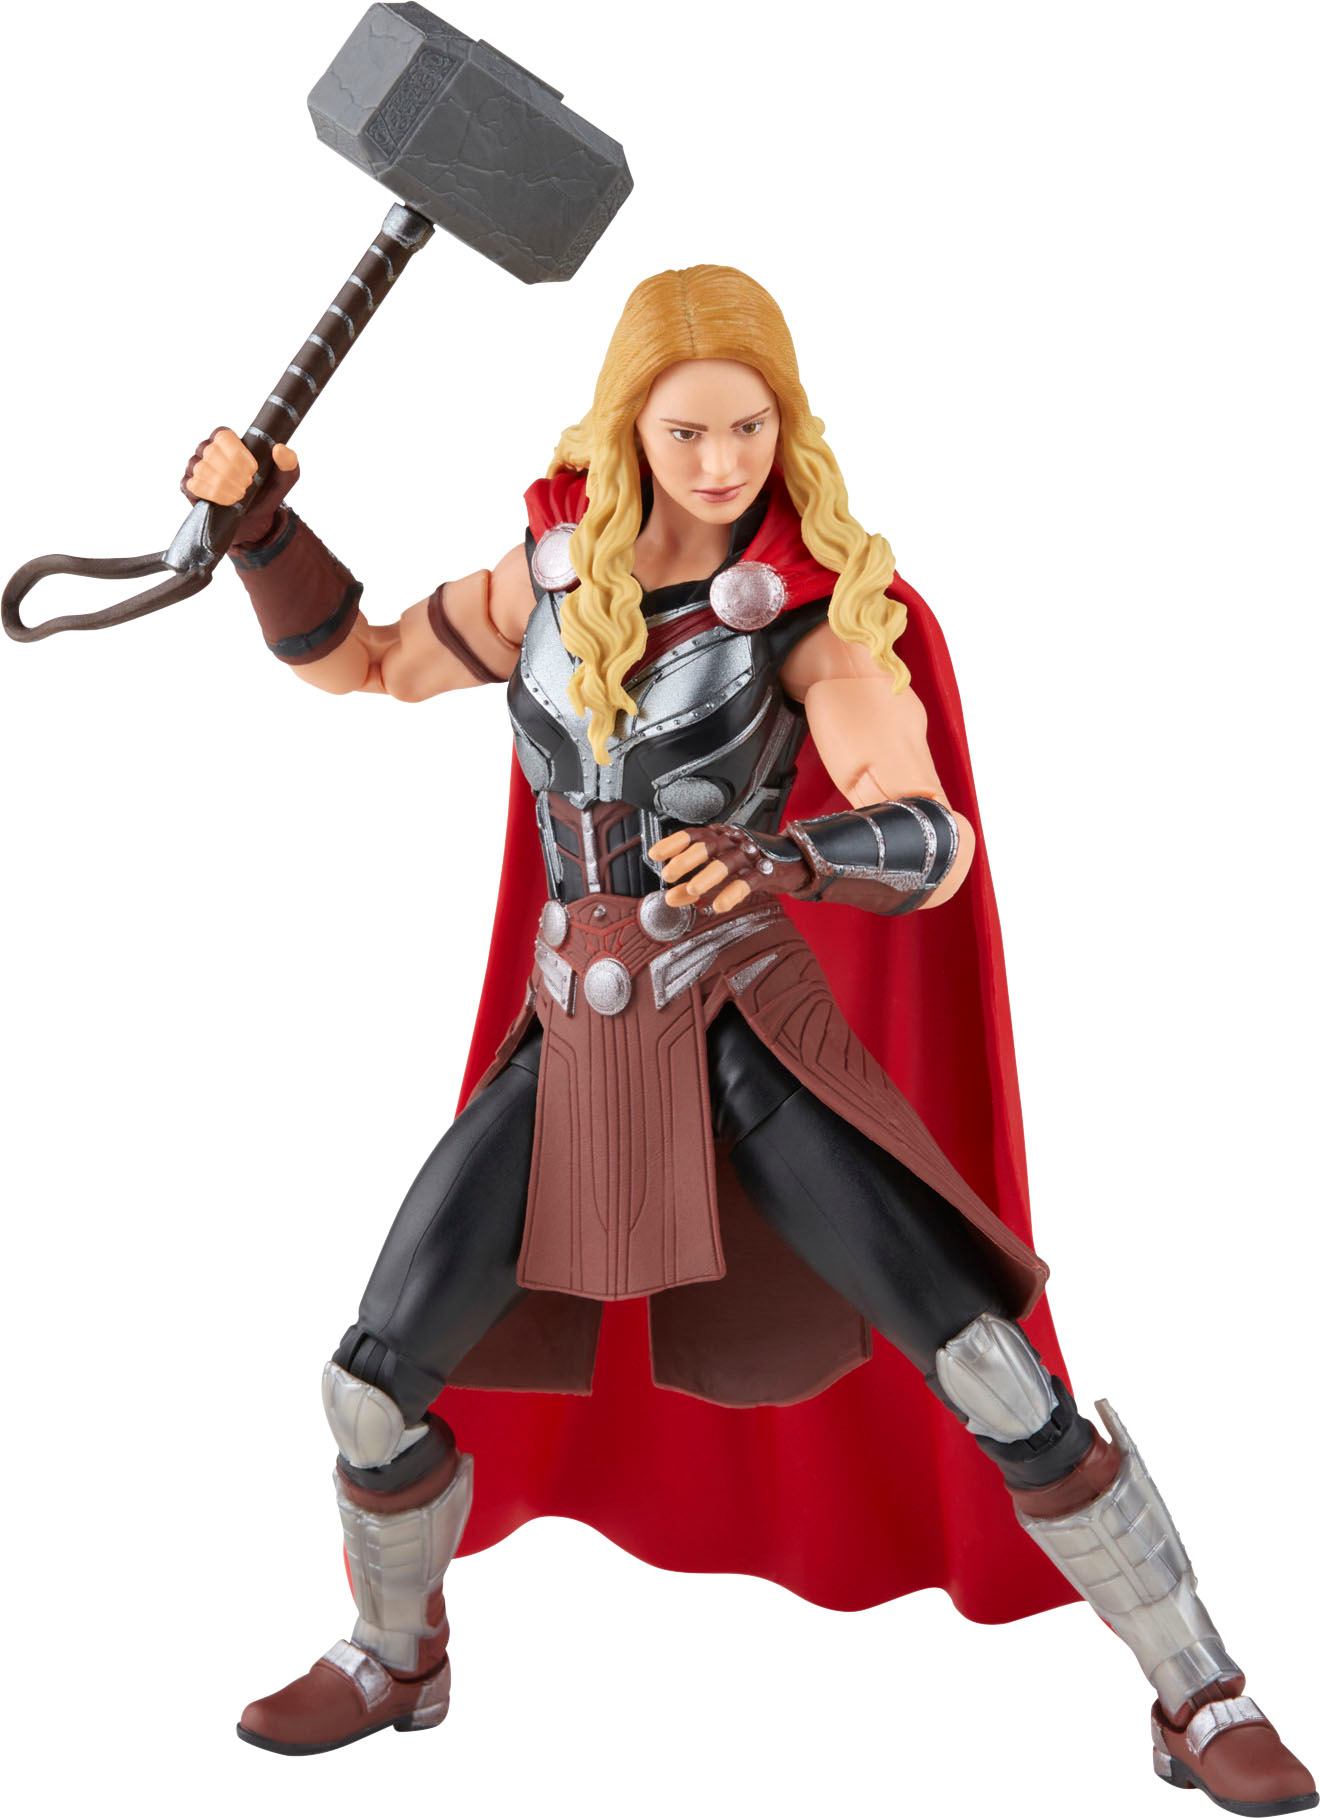 Marvel Legends Series Thor: Love and Thunder Ravager  - Best Buy